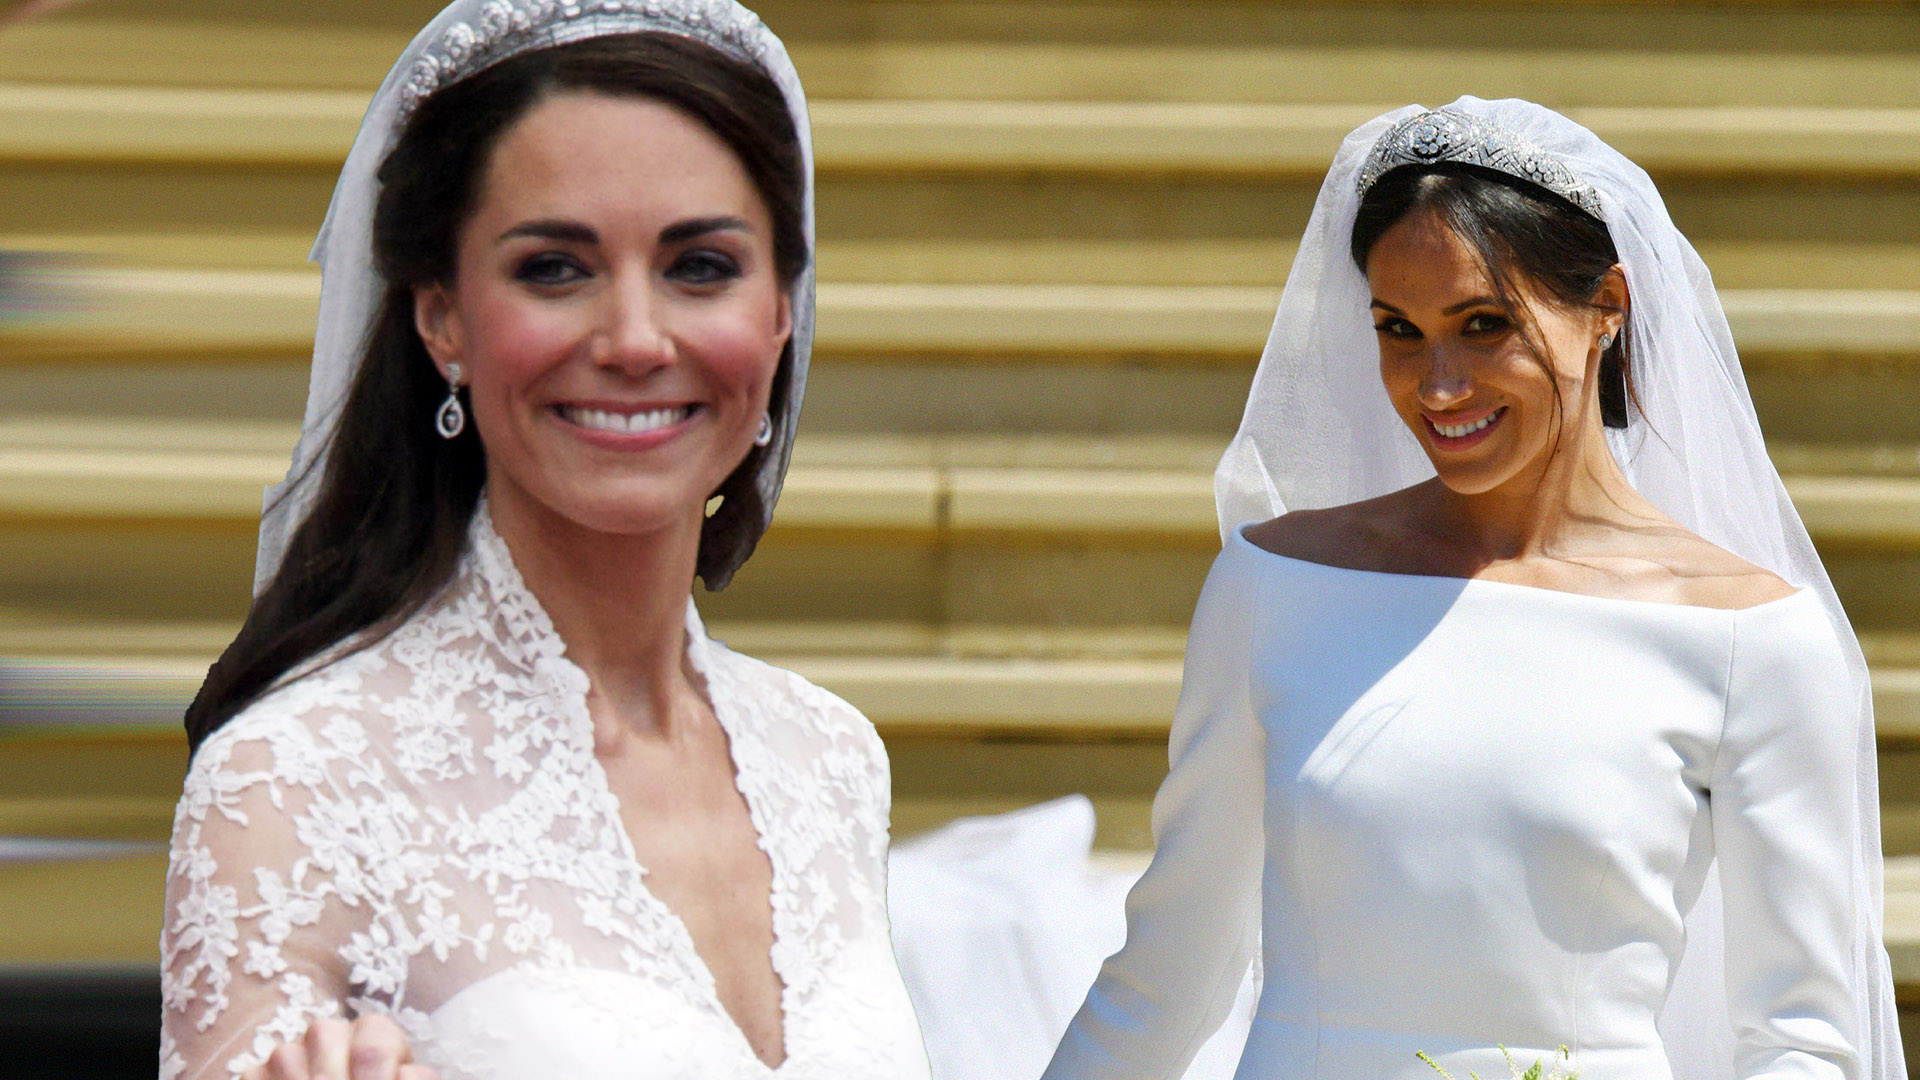 The One Major Difference Between Kate and Meghan's Wedding Dresses